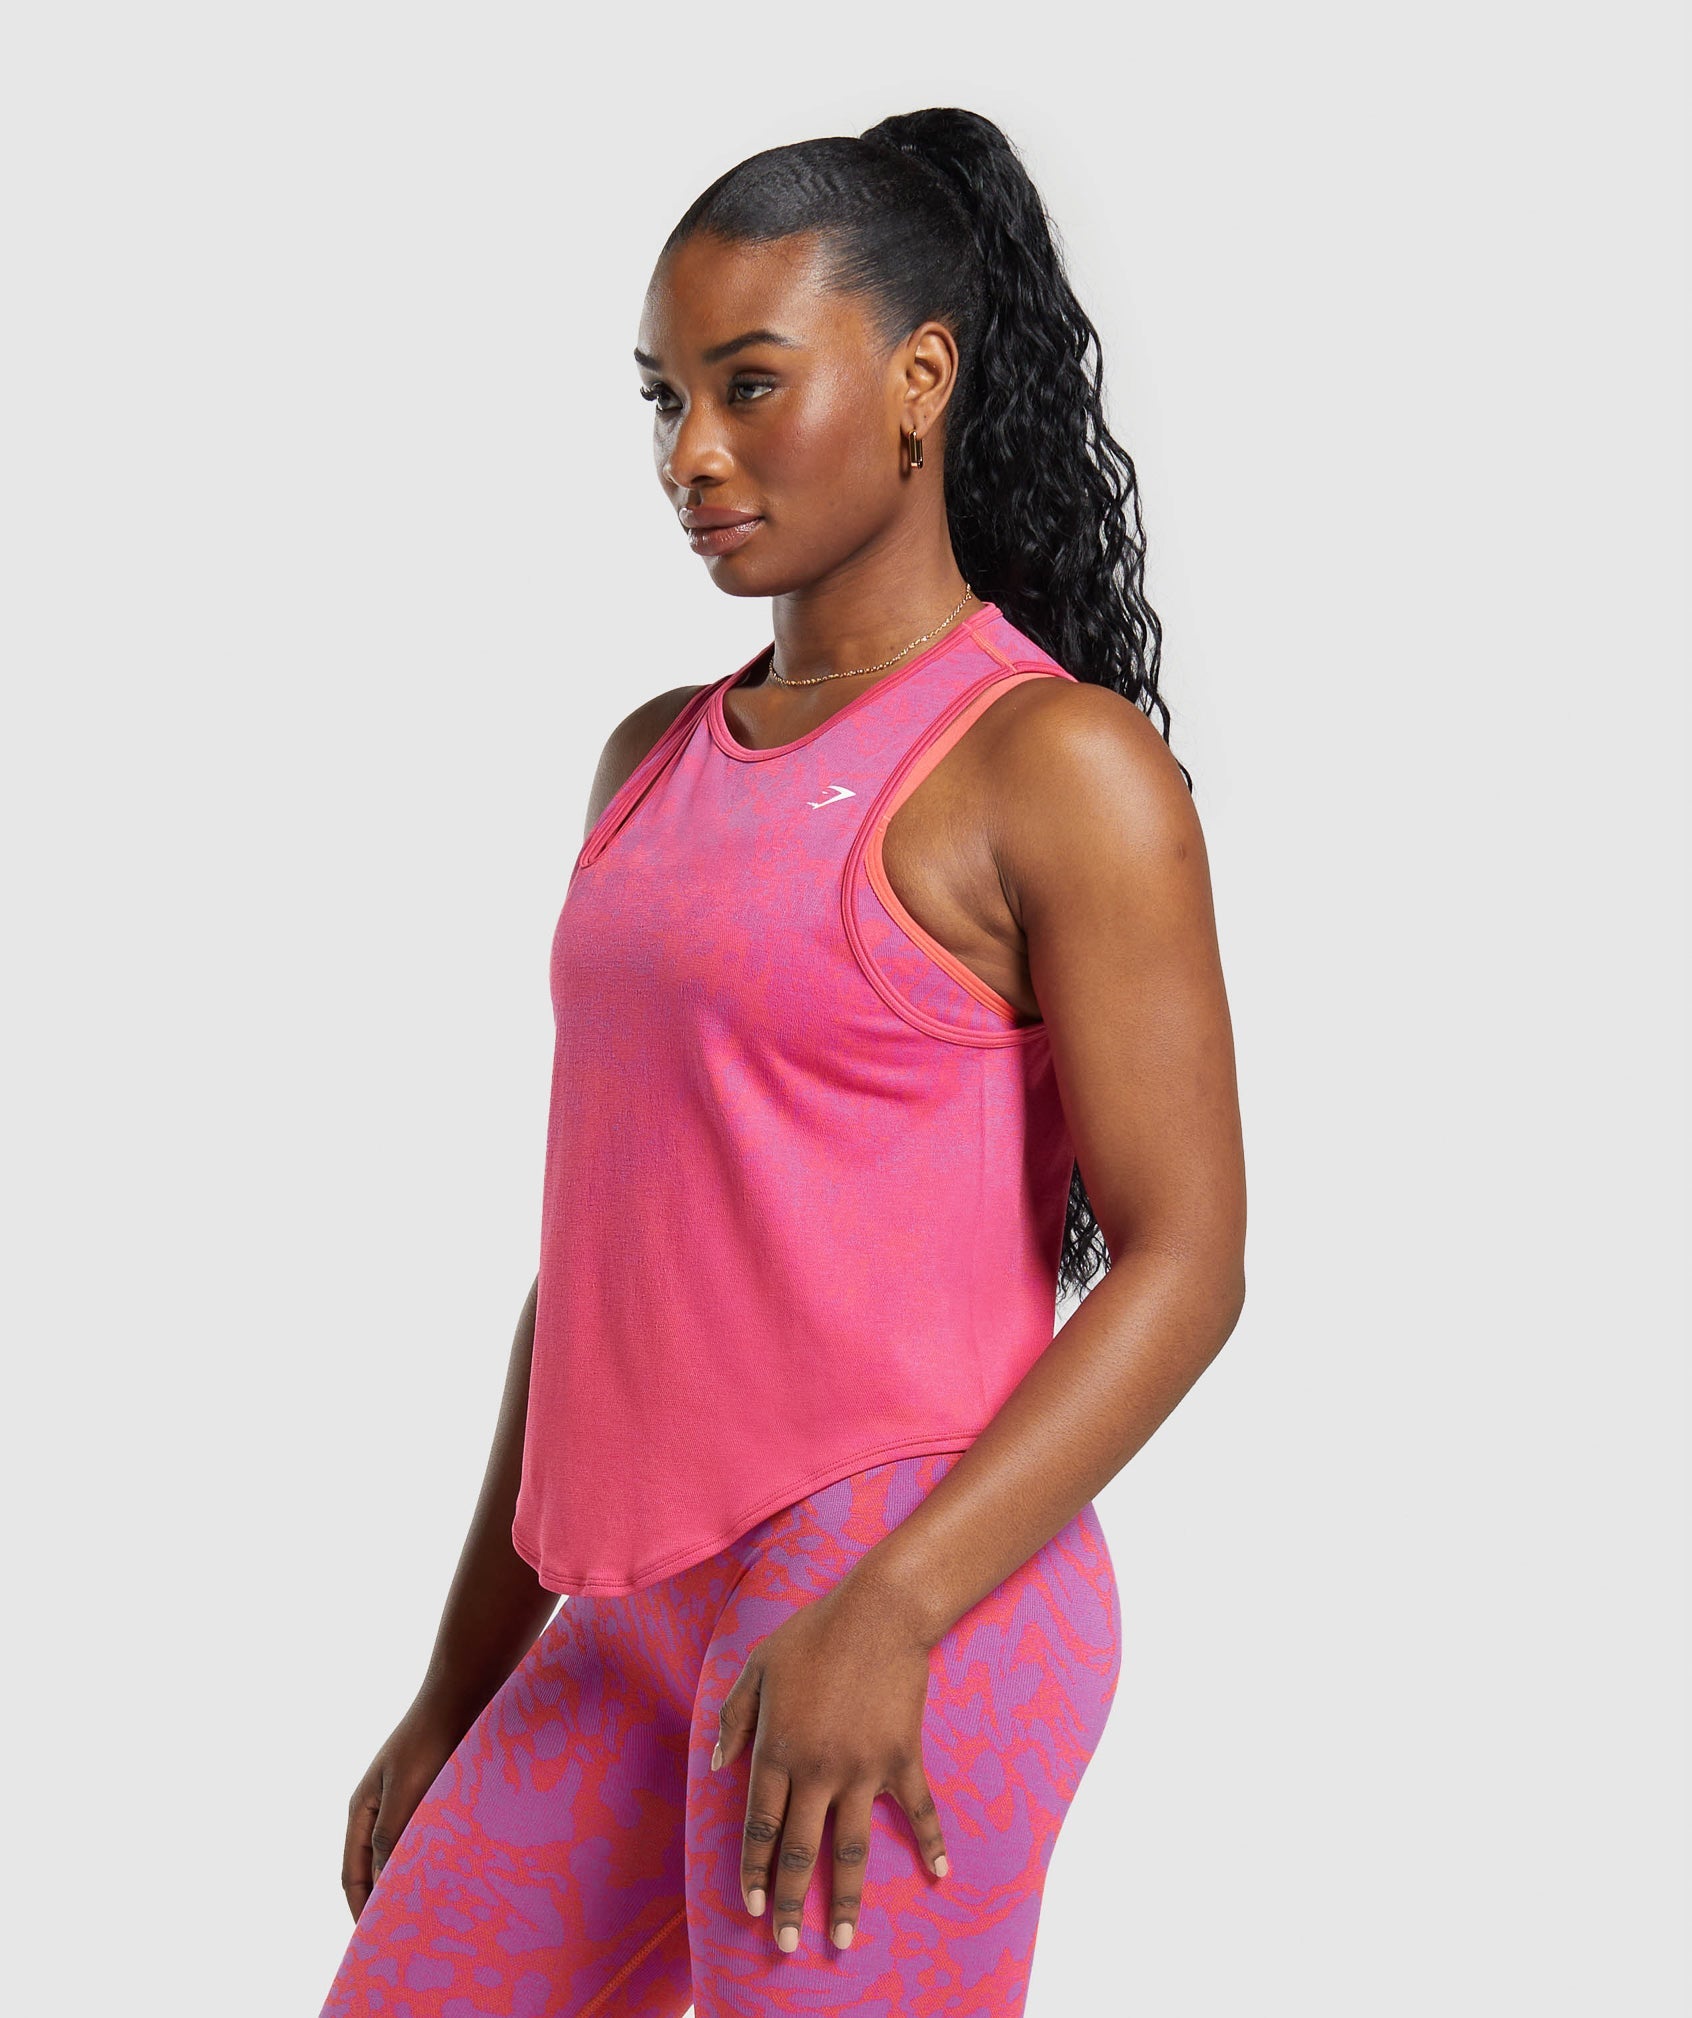 Adapt Safari Seamless Drop Arm Faded Tank in Shelly Pink/Fly Coral - view 3